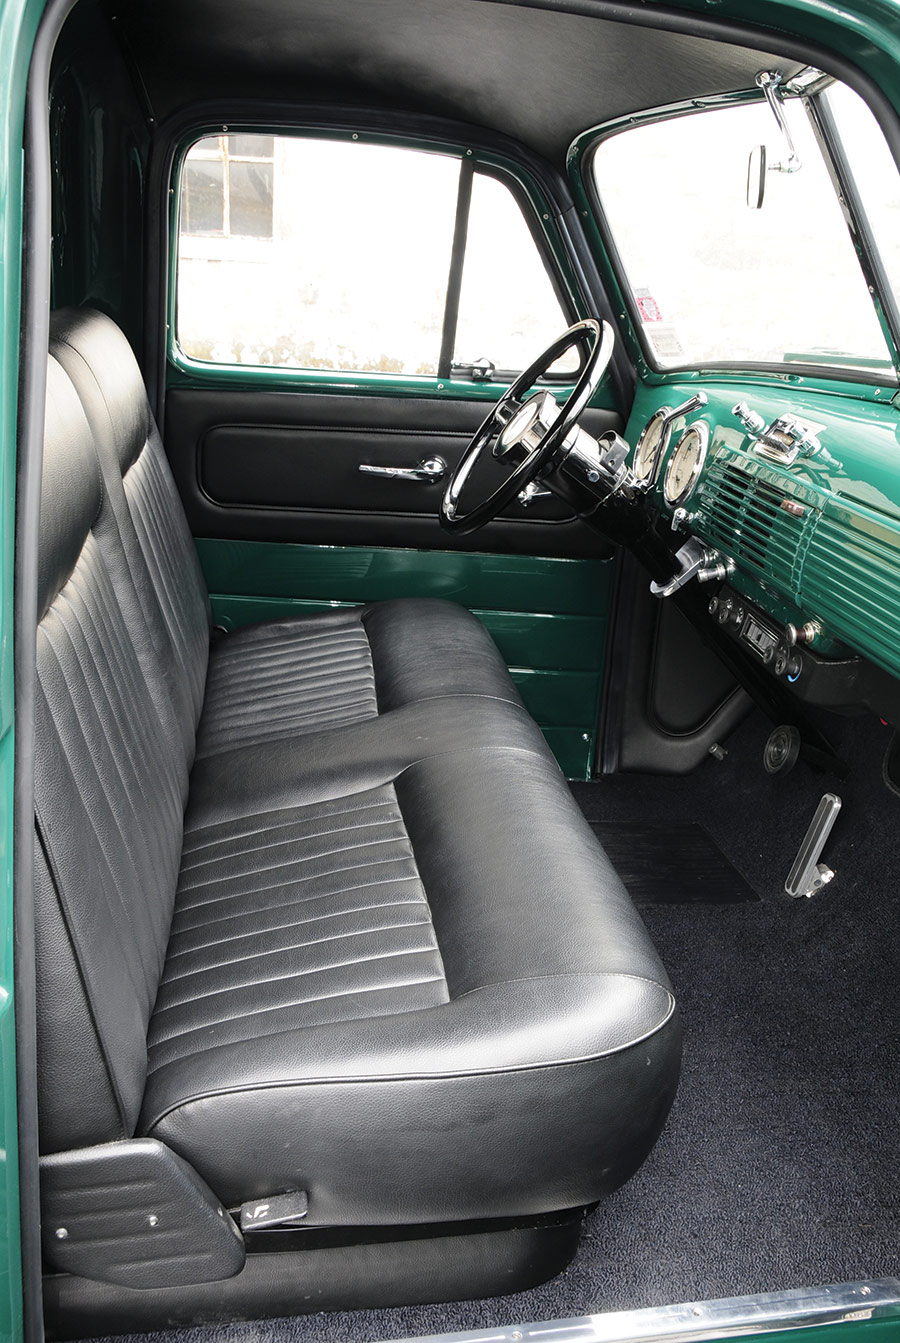 '52 Chevy seat detailing